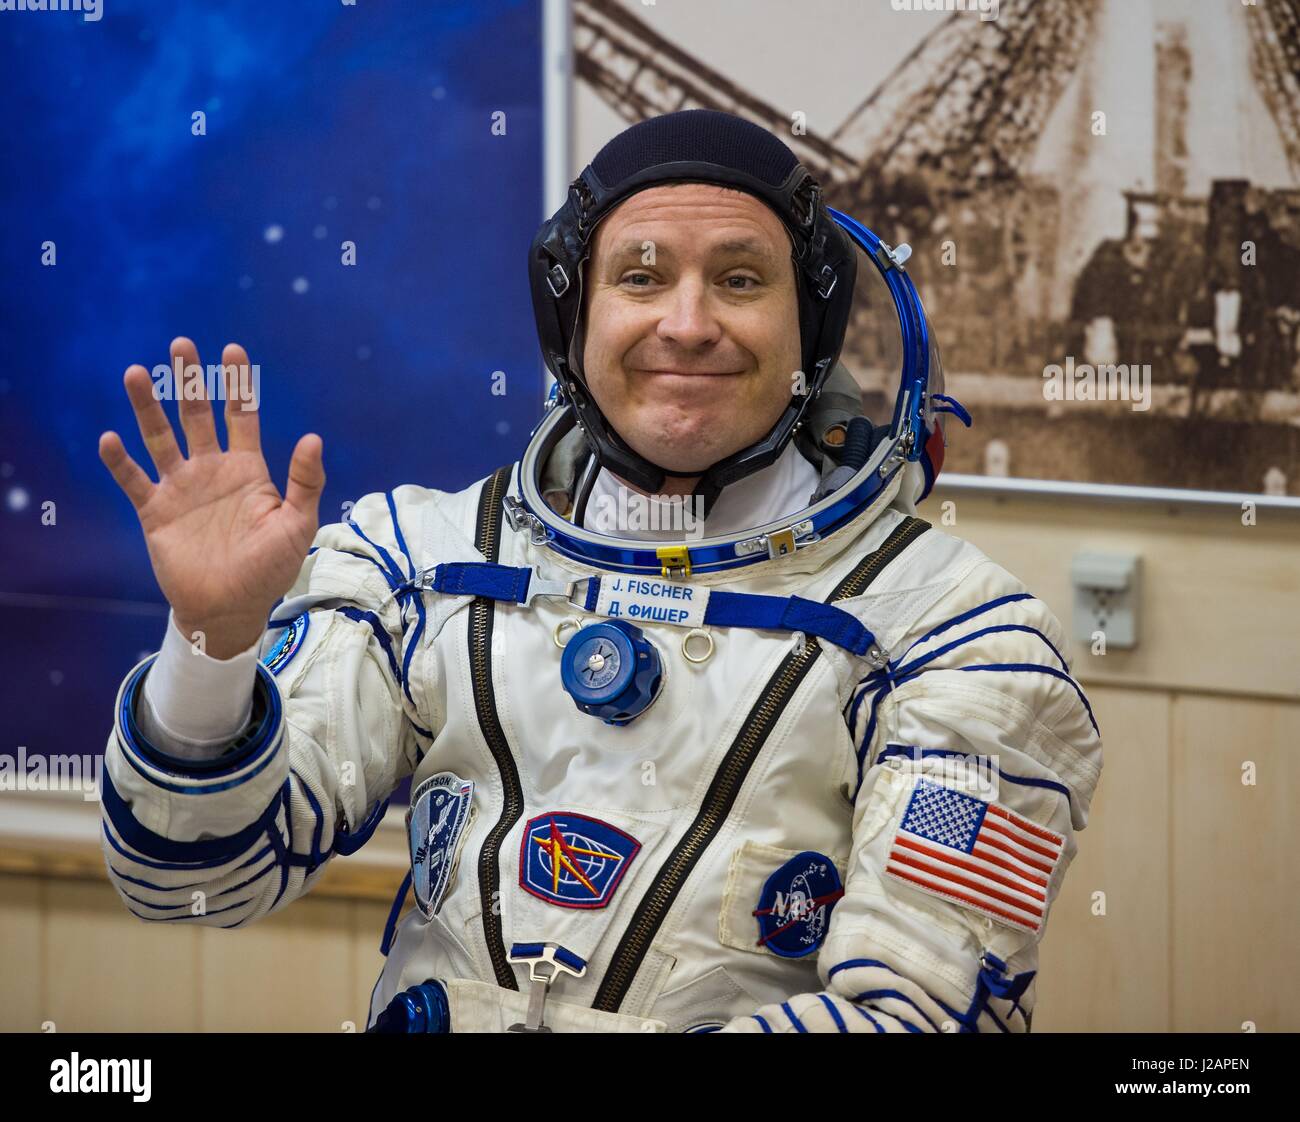 NASA International Space Station Expedition 51 prime crew member American astronaut Jack Fischer has his Russian Sokol launch and entry spacesuit pressure-checked in preparation for the Soyuz MS-04 launch at the Baikonur Cosmodrome April 20, 2017 in Baikonur, Kazakhstan.     (photo by Aubrey Gemignani /NASA  via Planetpix) Stock Photo